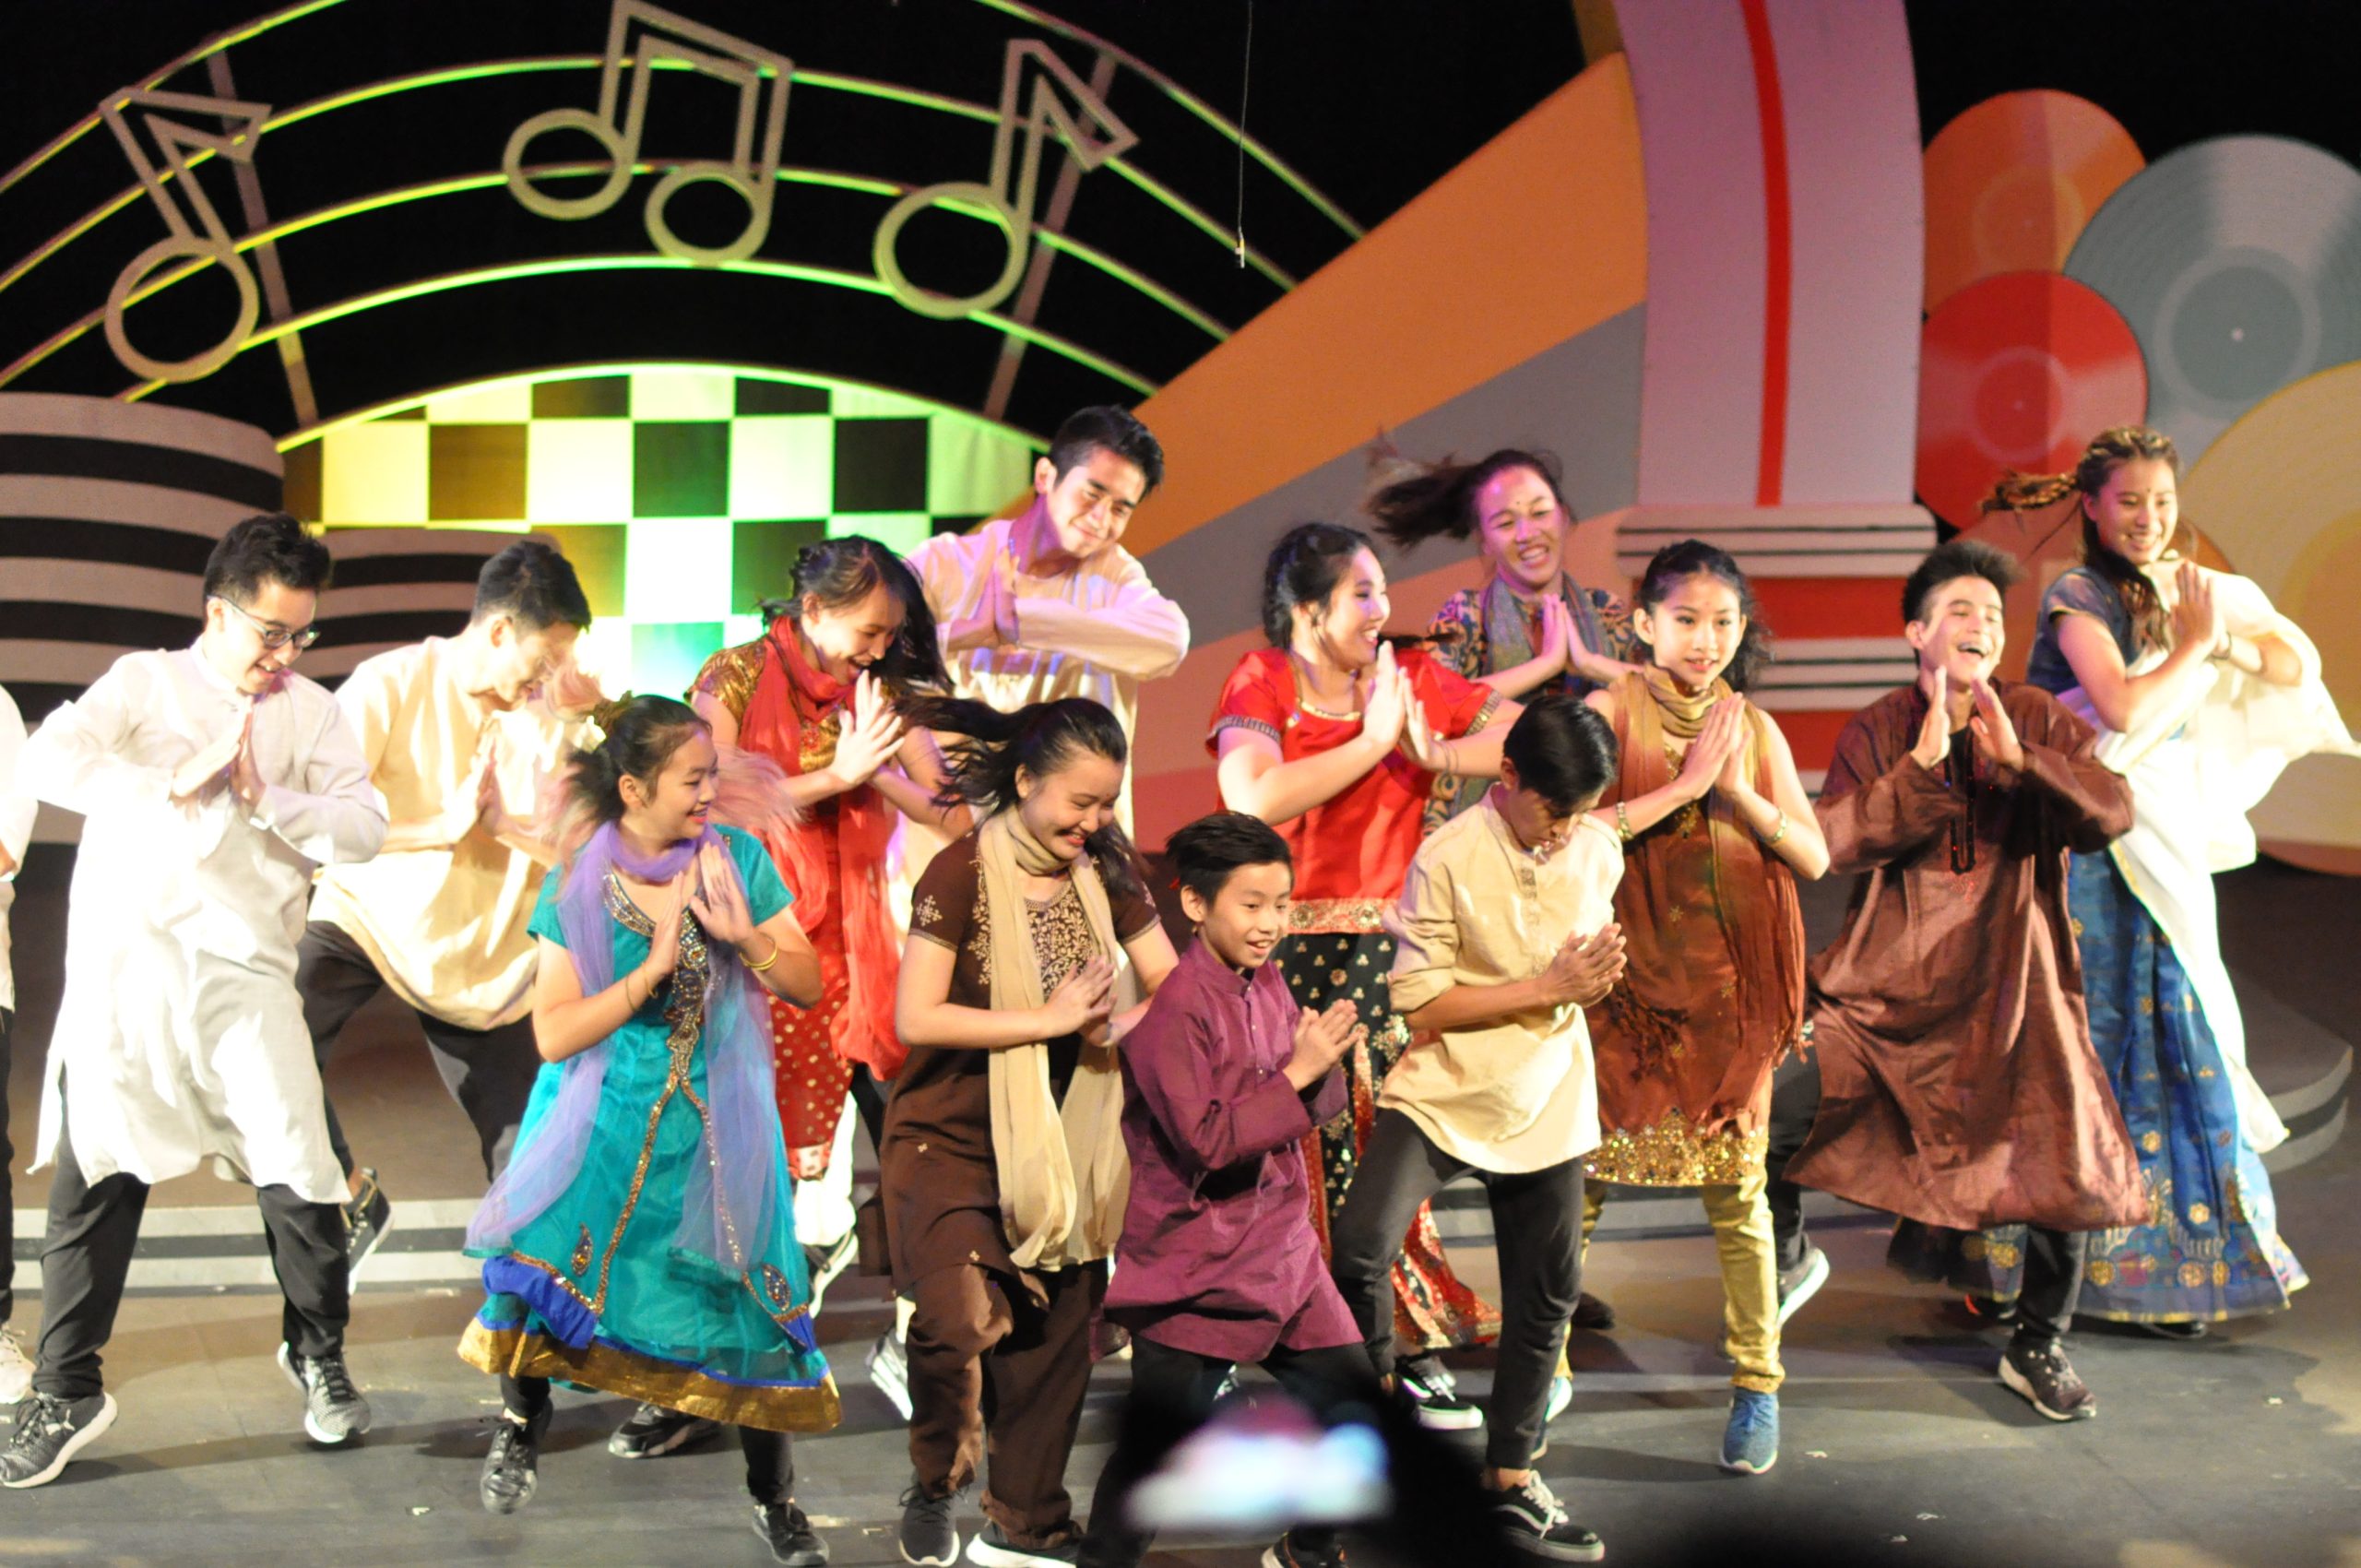 Students from dance class performing on stage in Sri Emas International School.